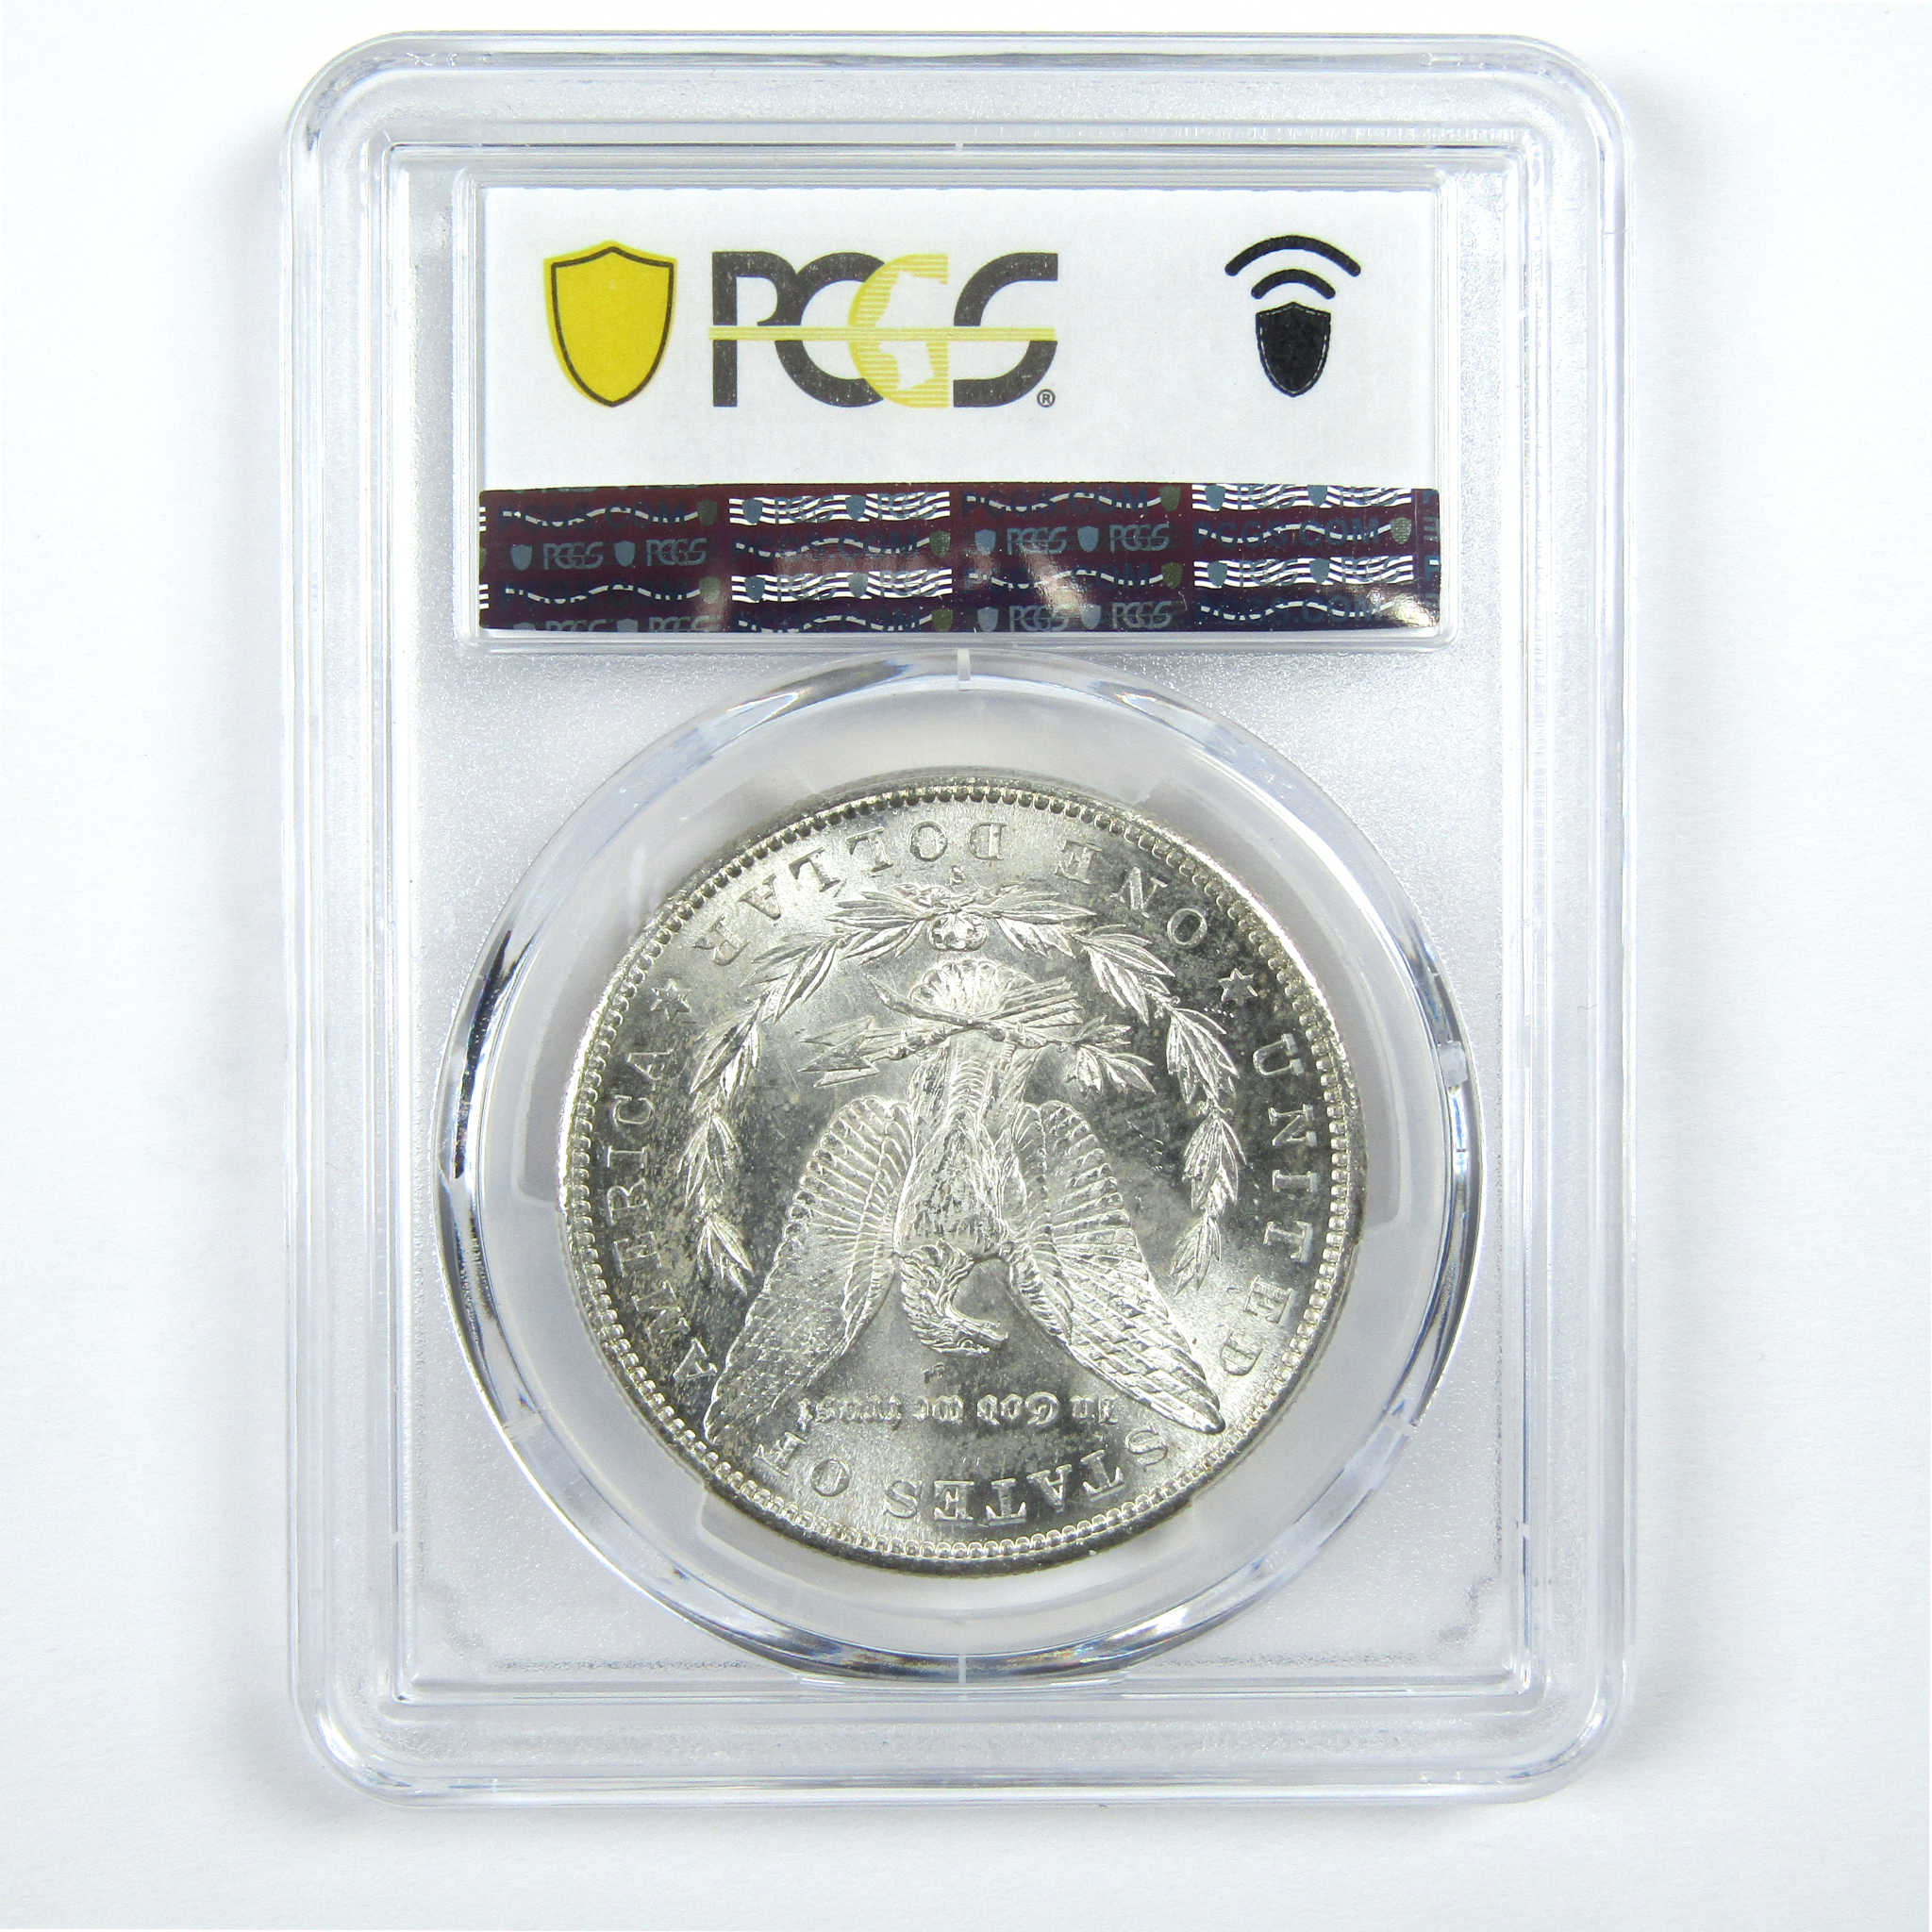 1886 S Morgan Dollar MS 61 PCGS Silver $1 Uncirculated Coin SKU:I13387 - Morgan coin - Morgan silver dollar - Morgan silver dollar for sale - Profile Coins &amp; Collectibles